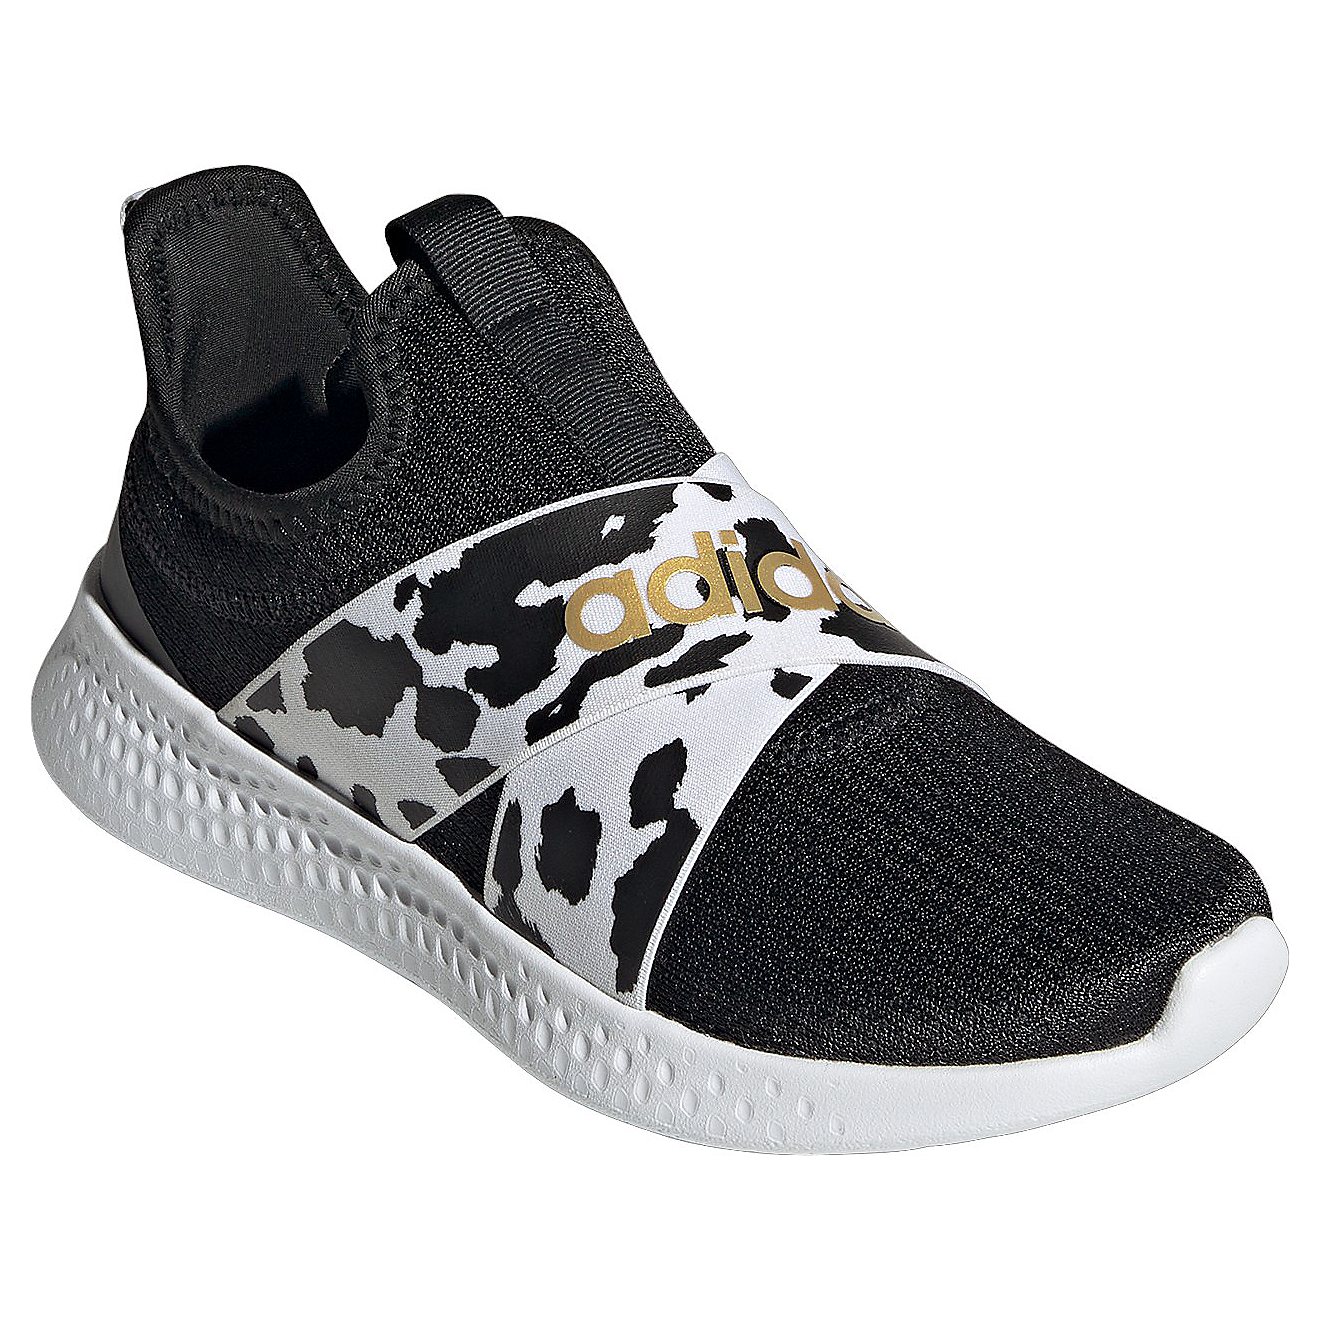 adidas Women's Puremotion Adapt Slip-On Lifestyle Shoes                                                                          - view number 2